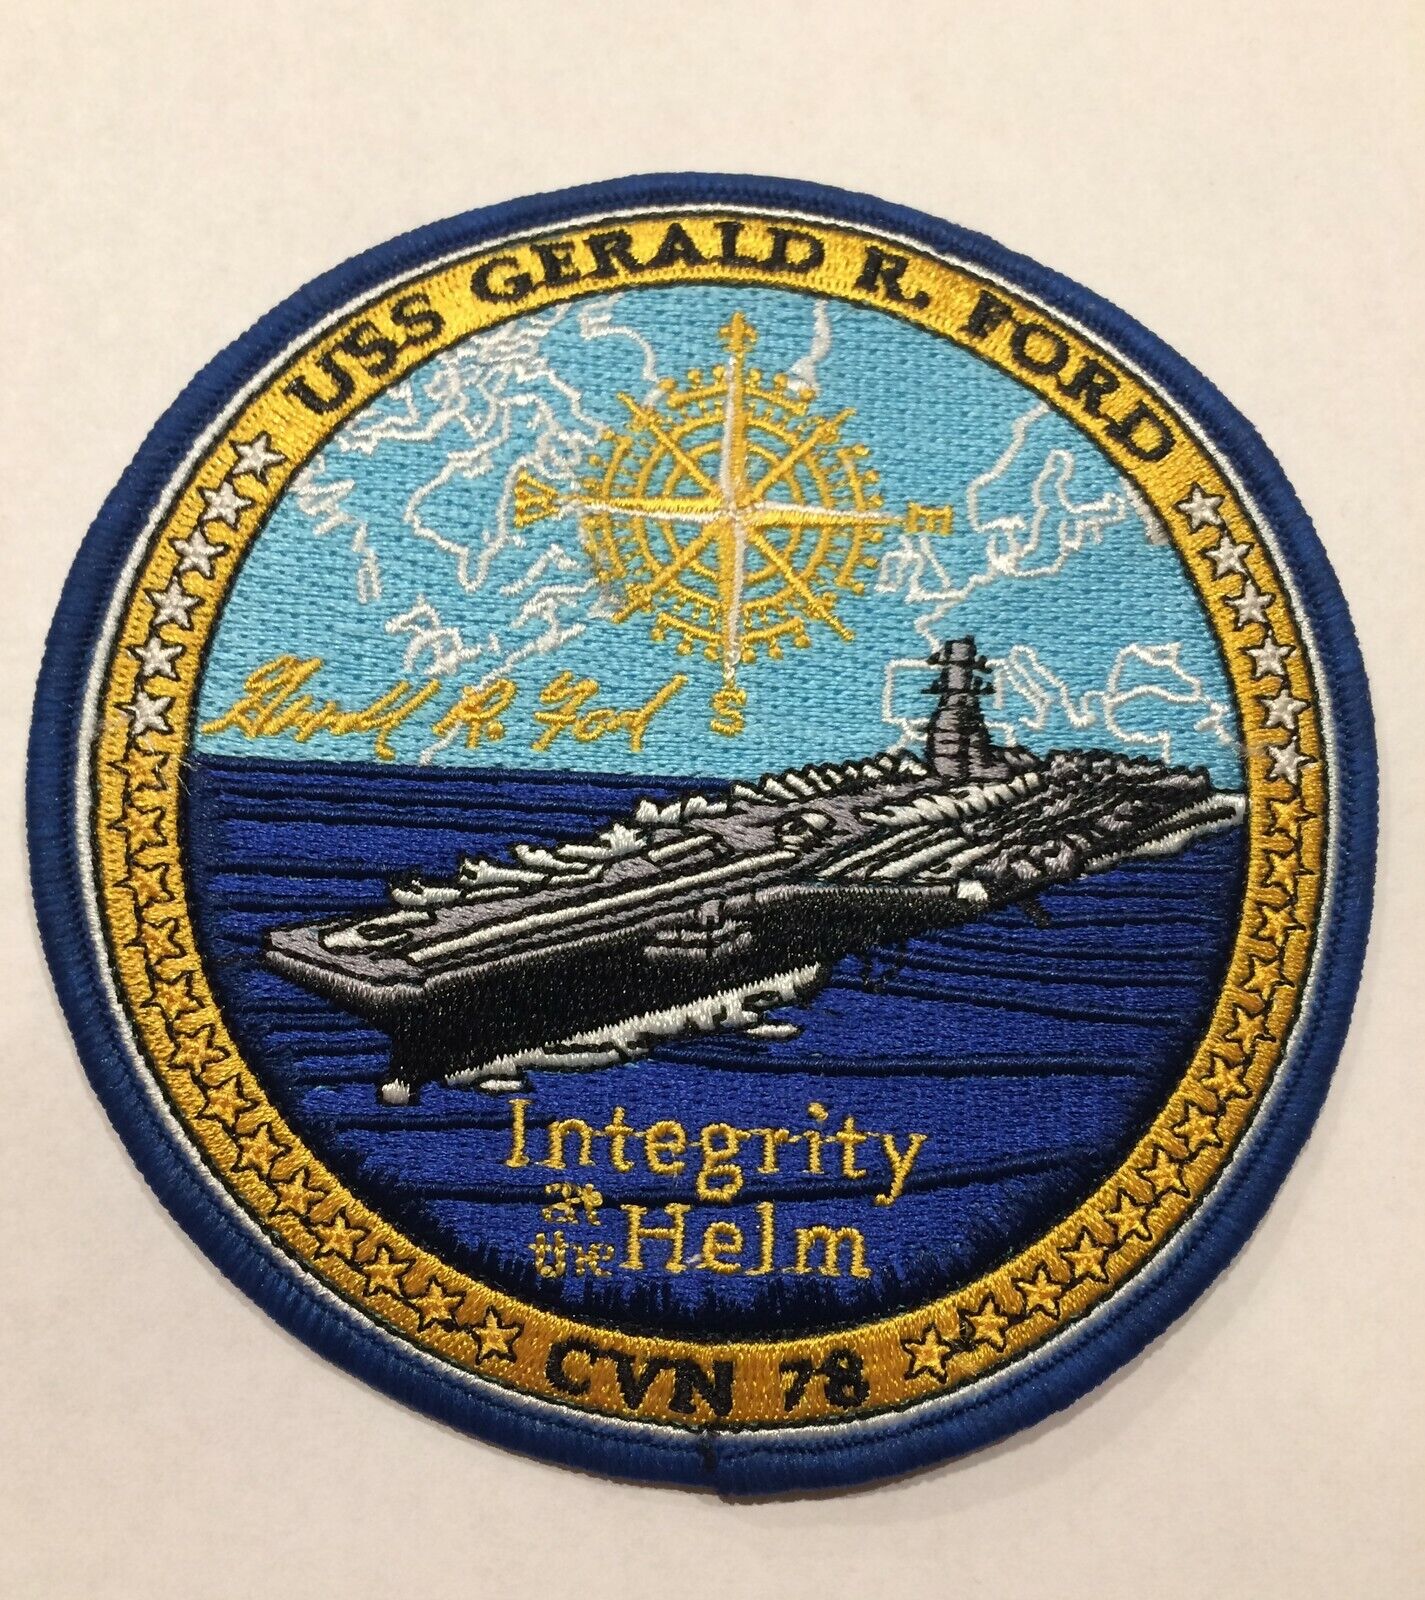 Patch of USS GERALD R. FORD (CVN 78)